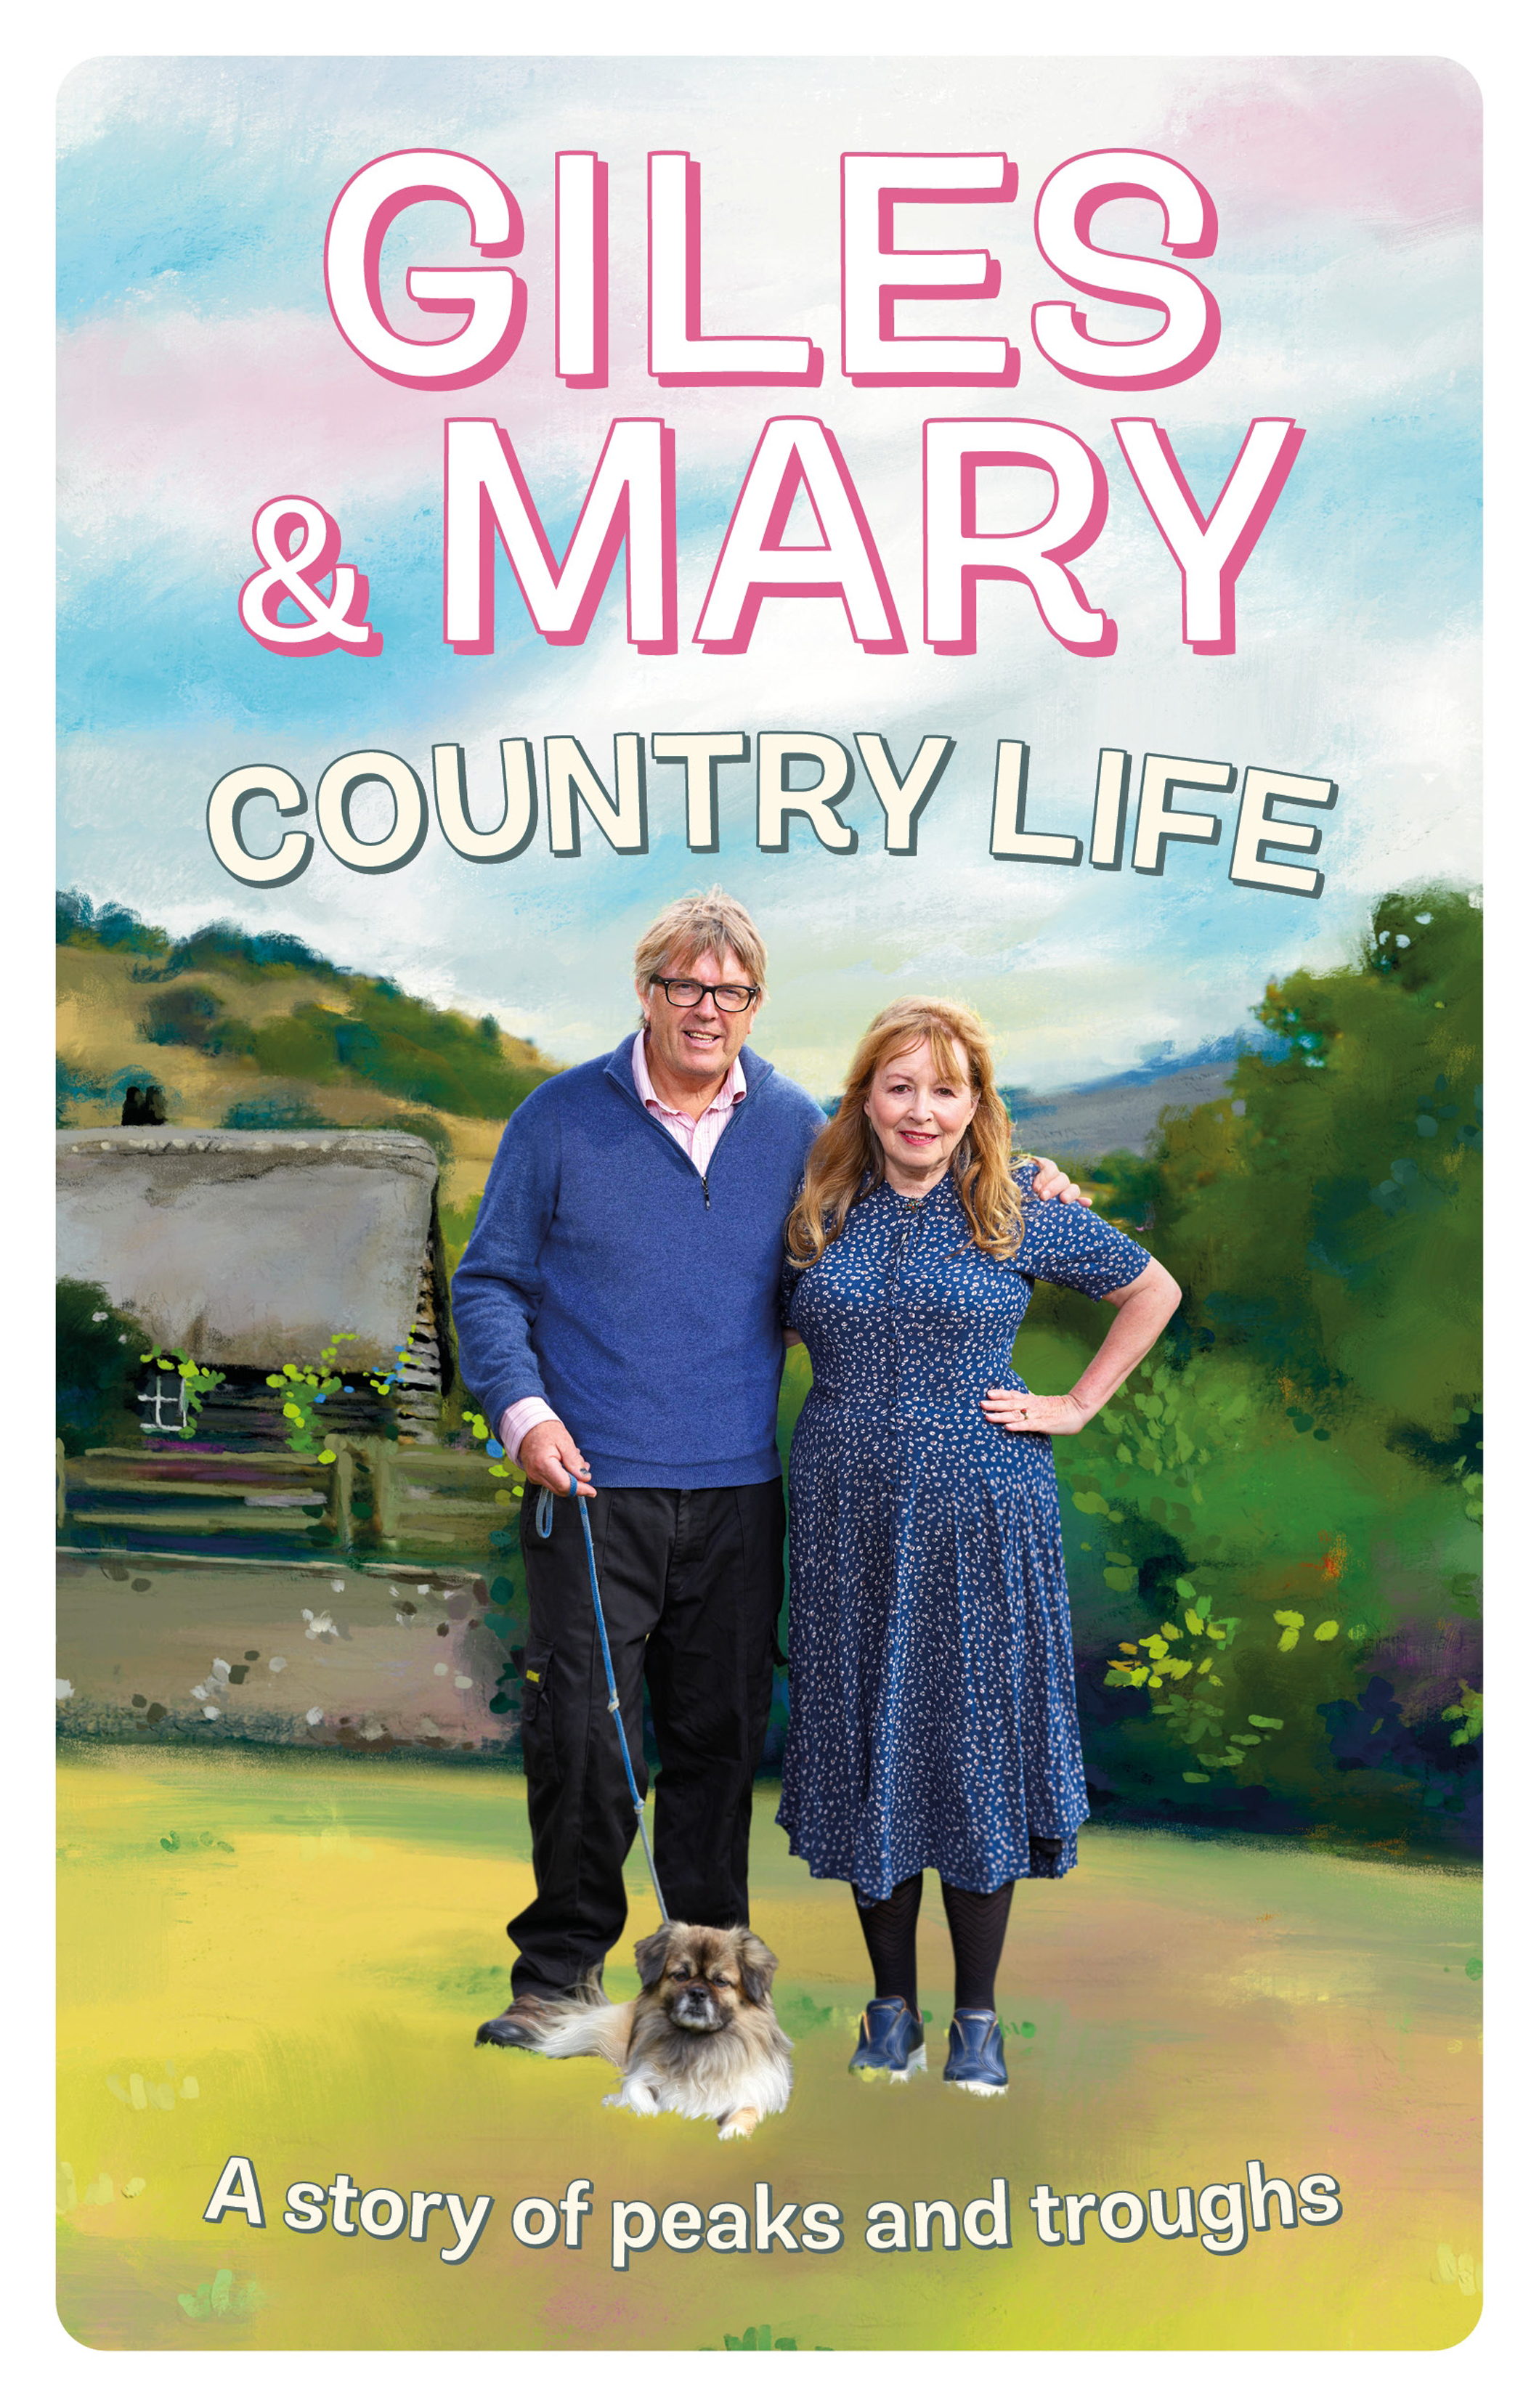 Book jacket of Country Life by Giles Wood and Mary Killen (Ebury Spotlight/PA)